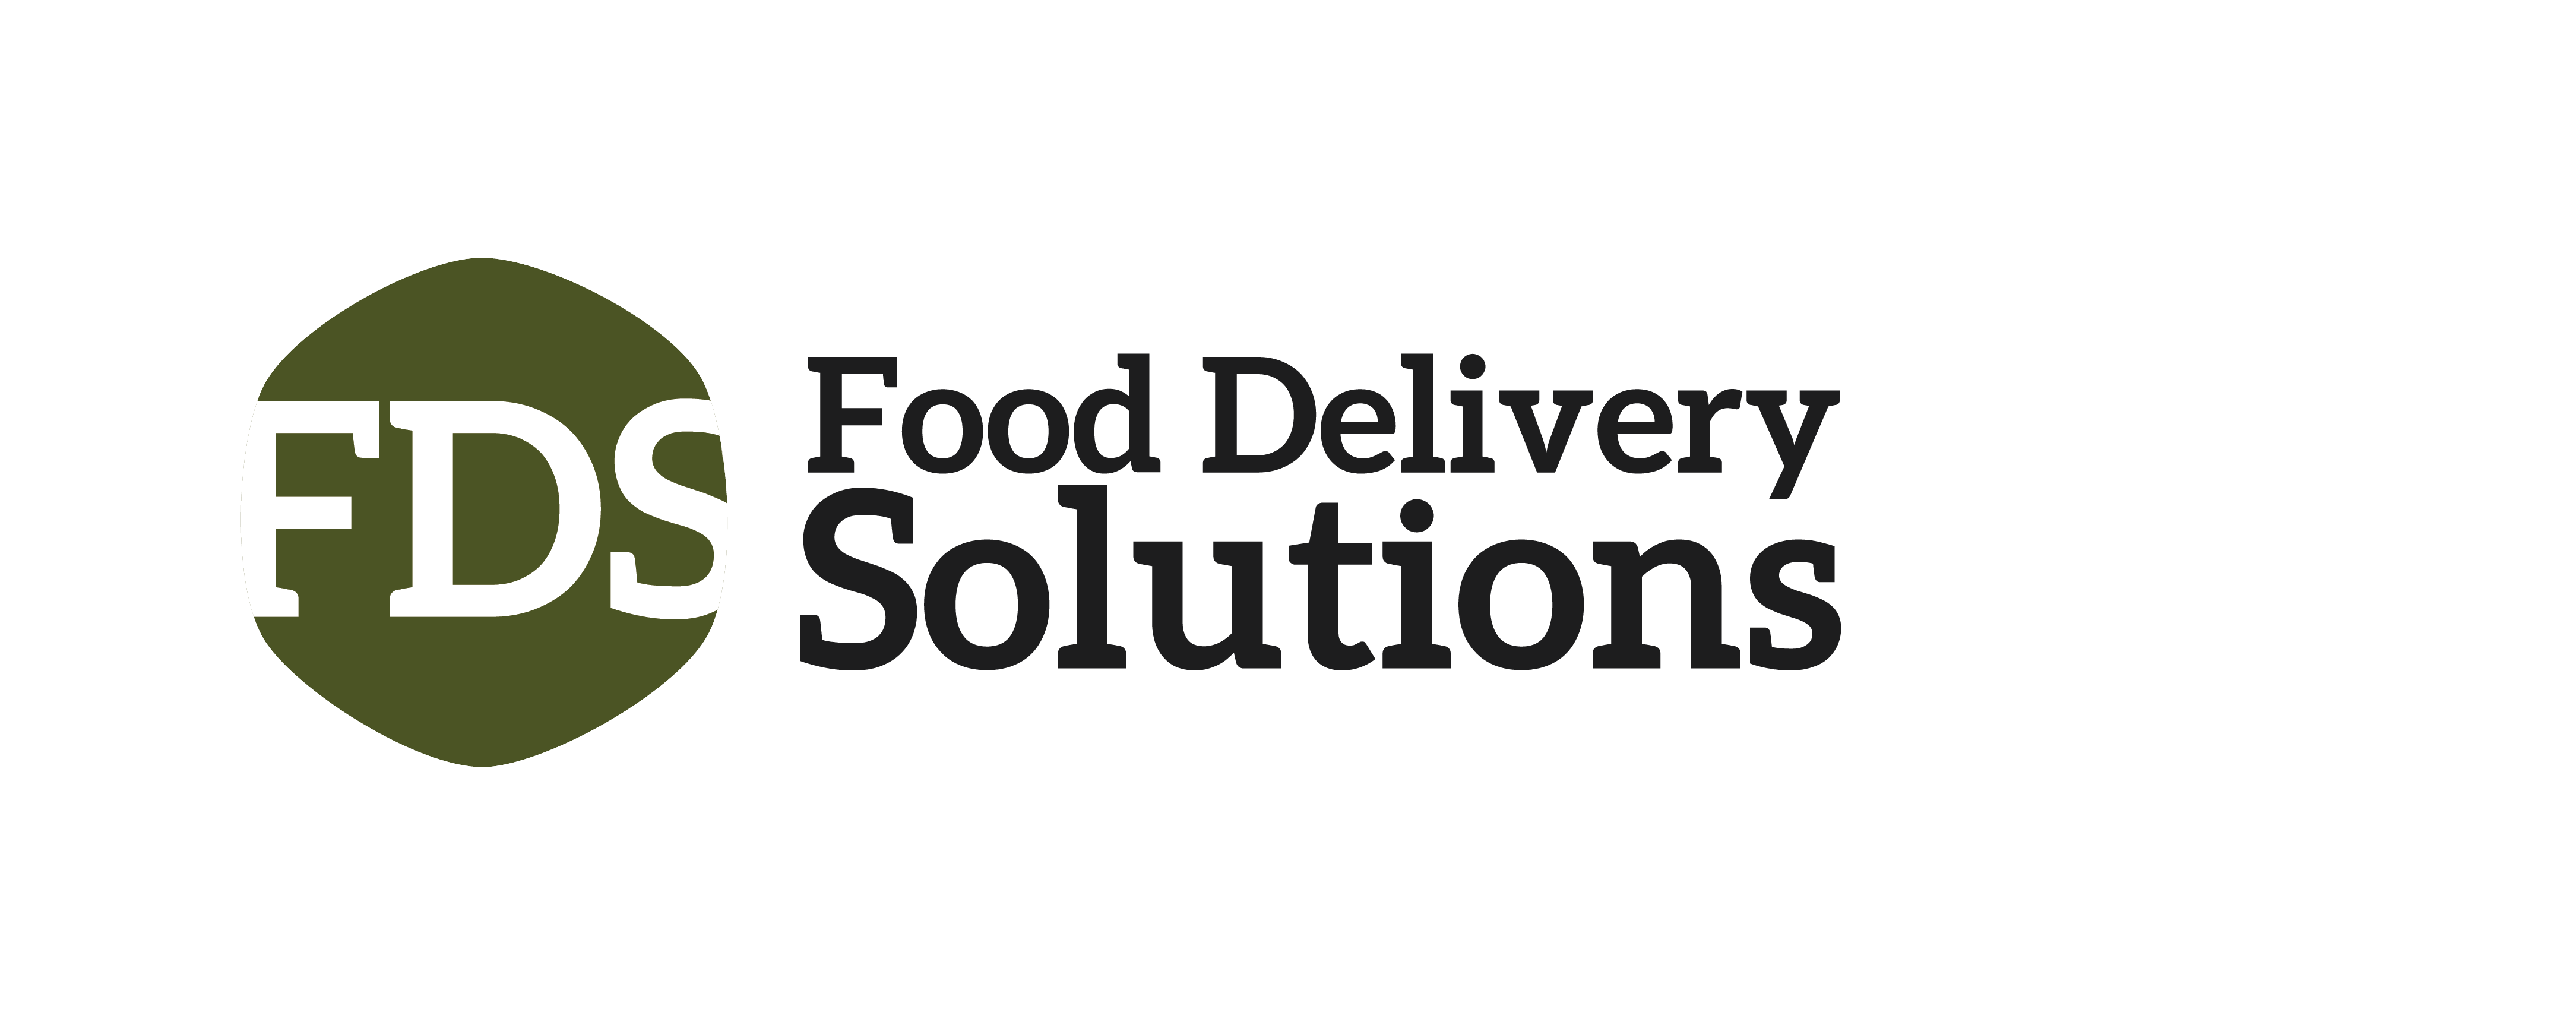 Food Delivery Solutions